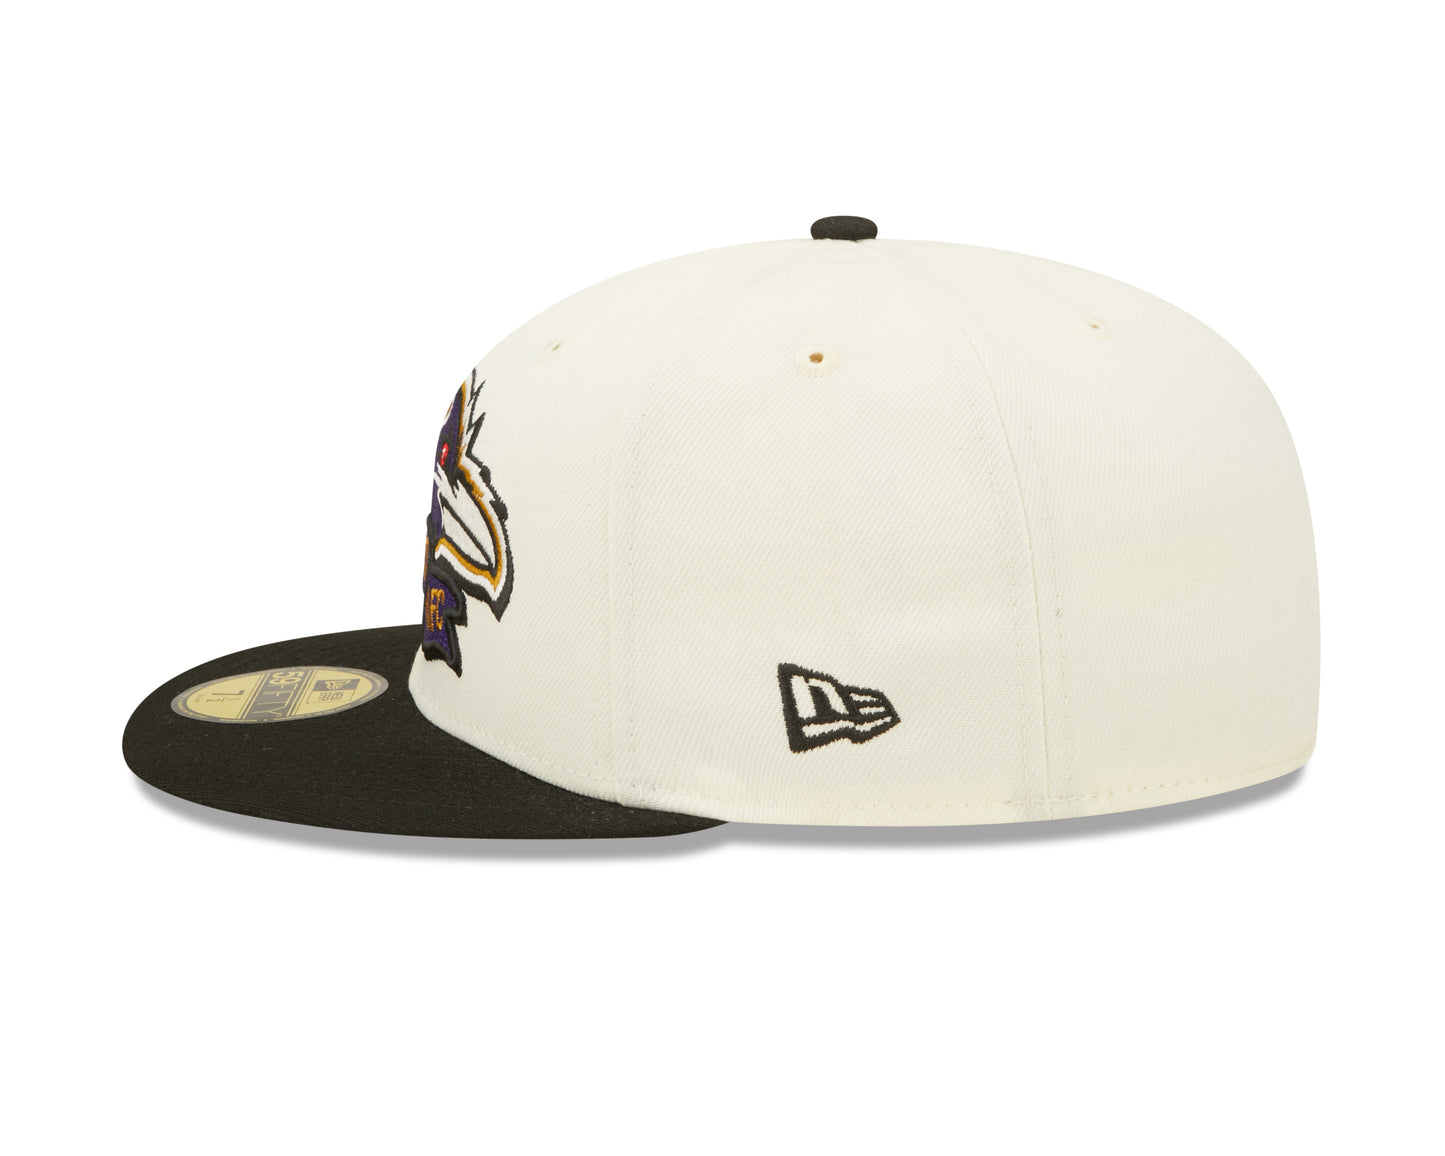 Baltimore Ravens New Era NFL Sideline 59fifty Fitted Hat- Cream